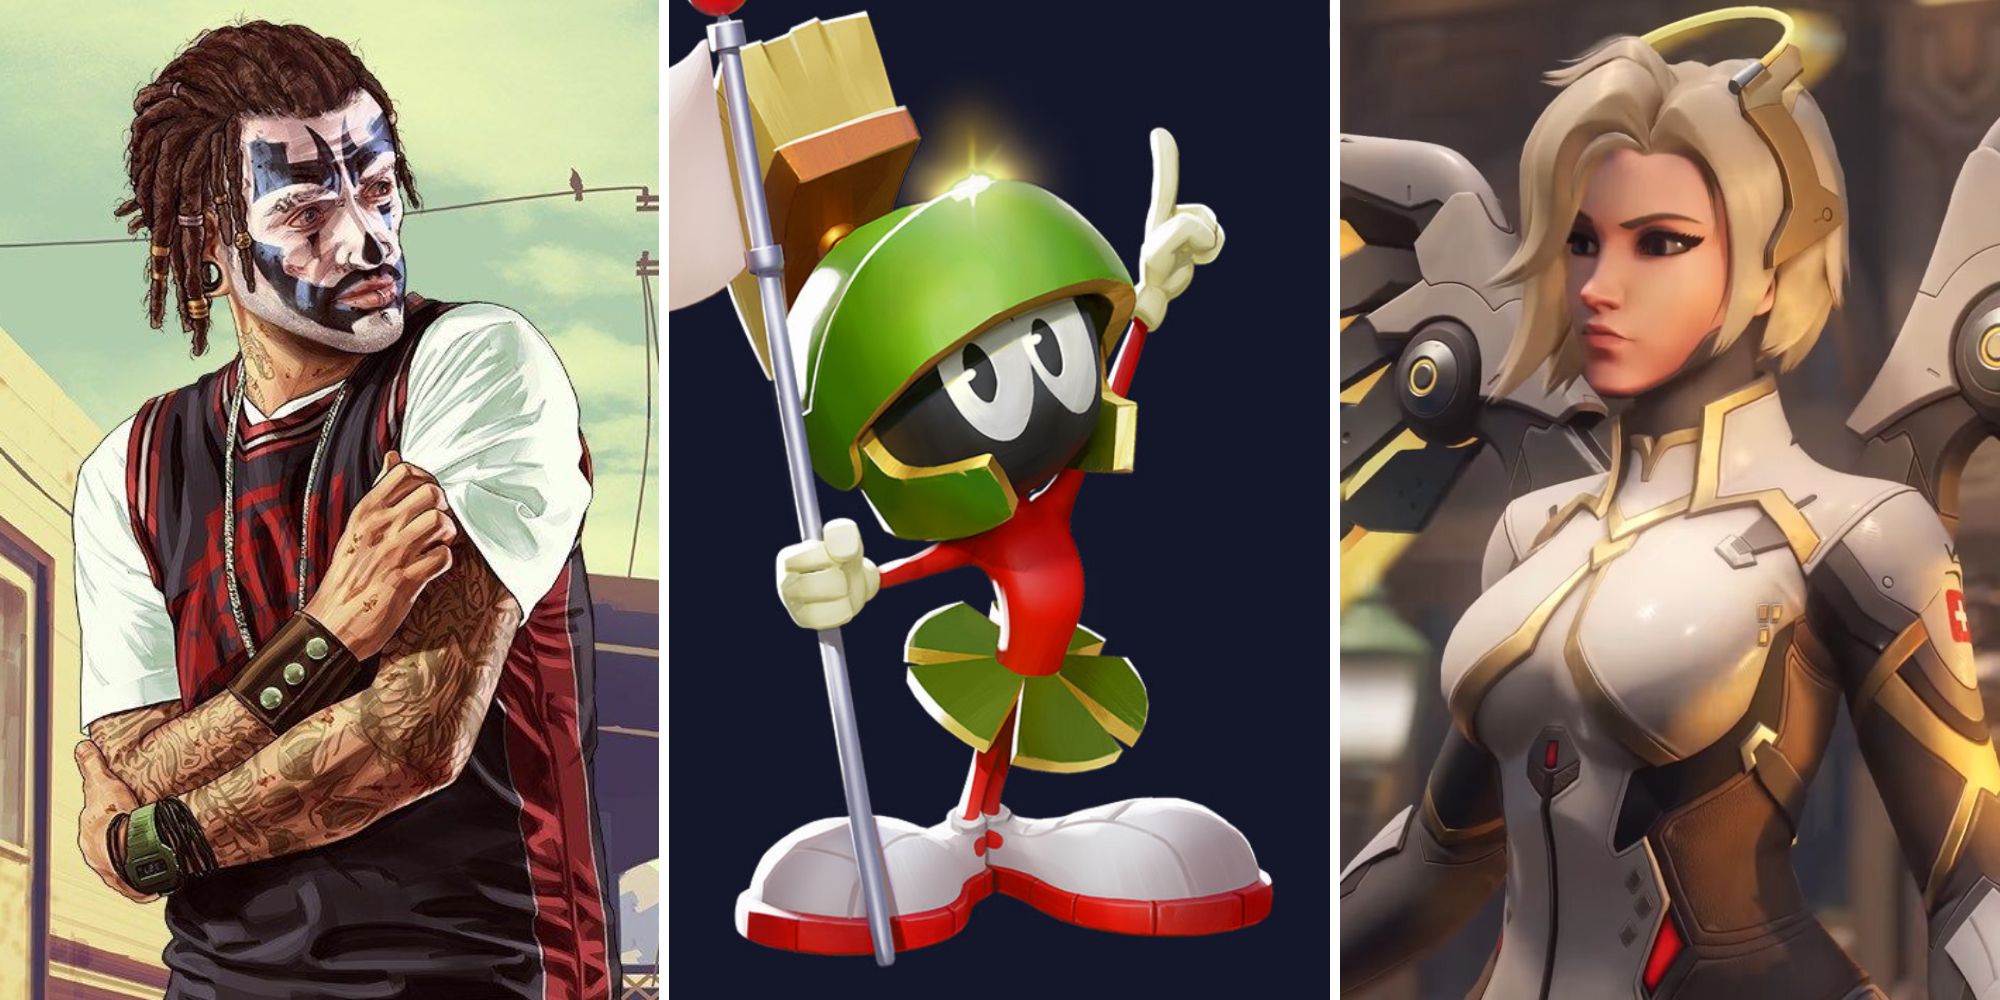 A character from GTA 5, Marvin the Martian, and Mercy from Overwatch